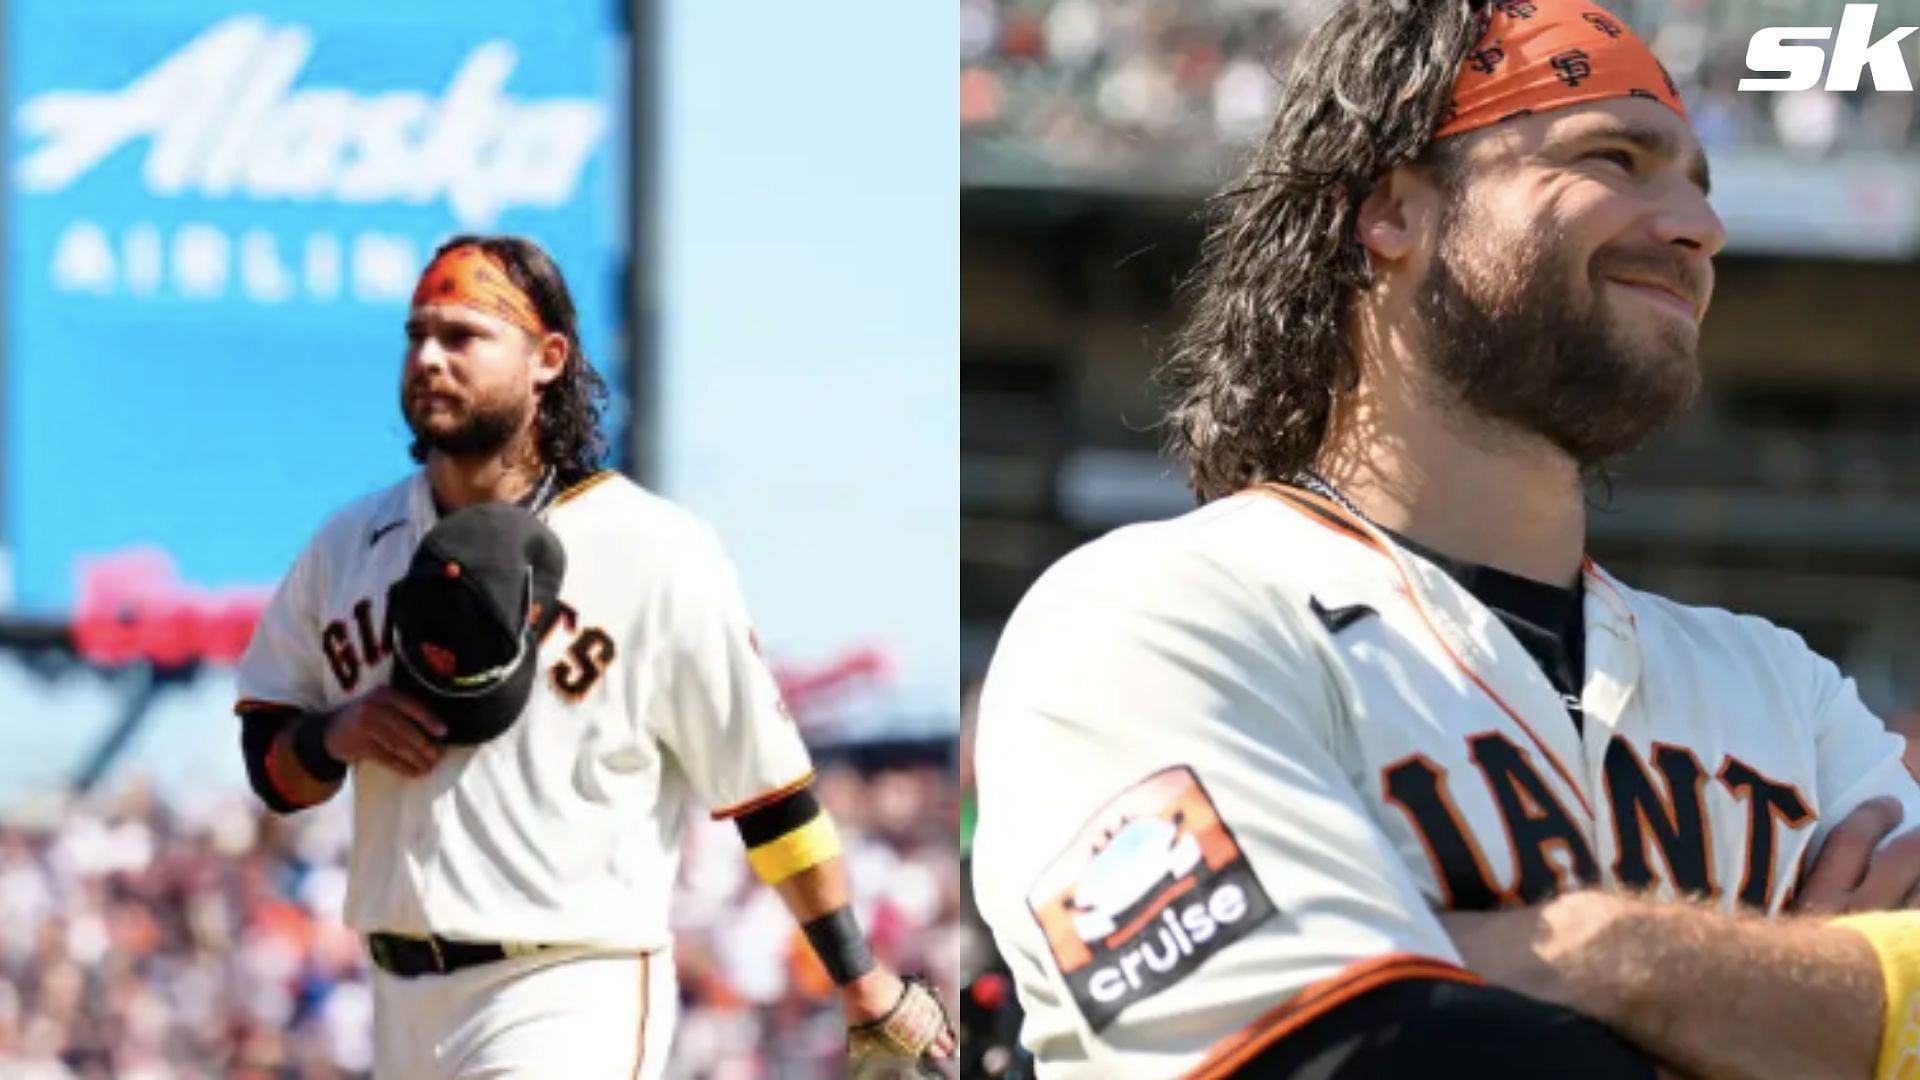 Giants shortstop Brandon Crawford embraces parenthood with Jalynne once  again with baby girl's arrival: Our family is complete